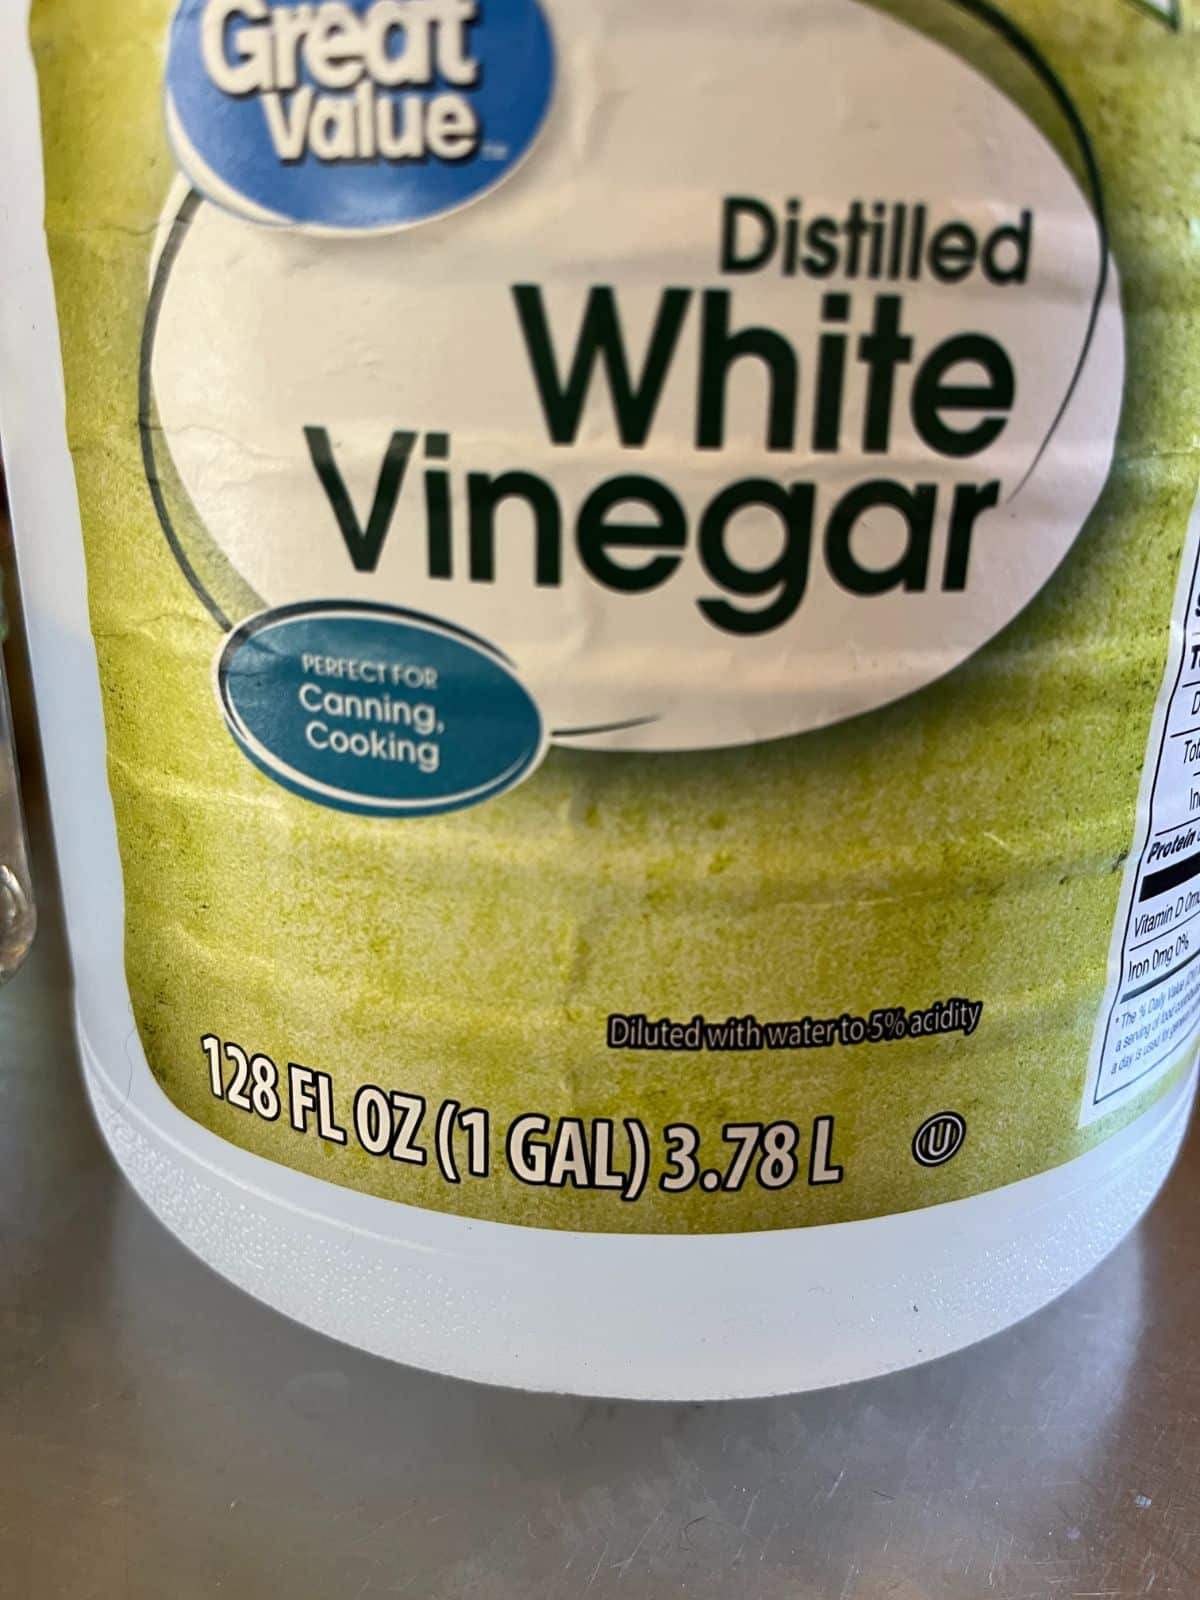 A gallon of 5% white vinegar labeled for canning